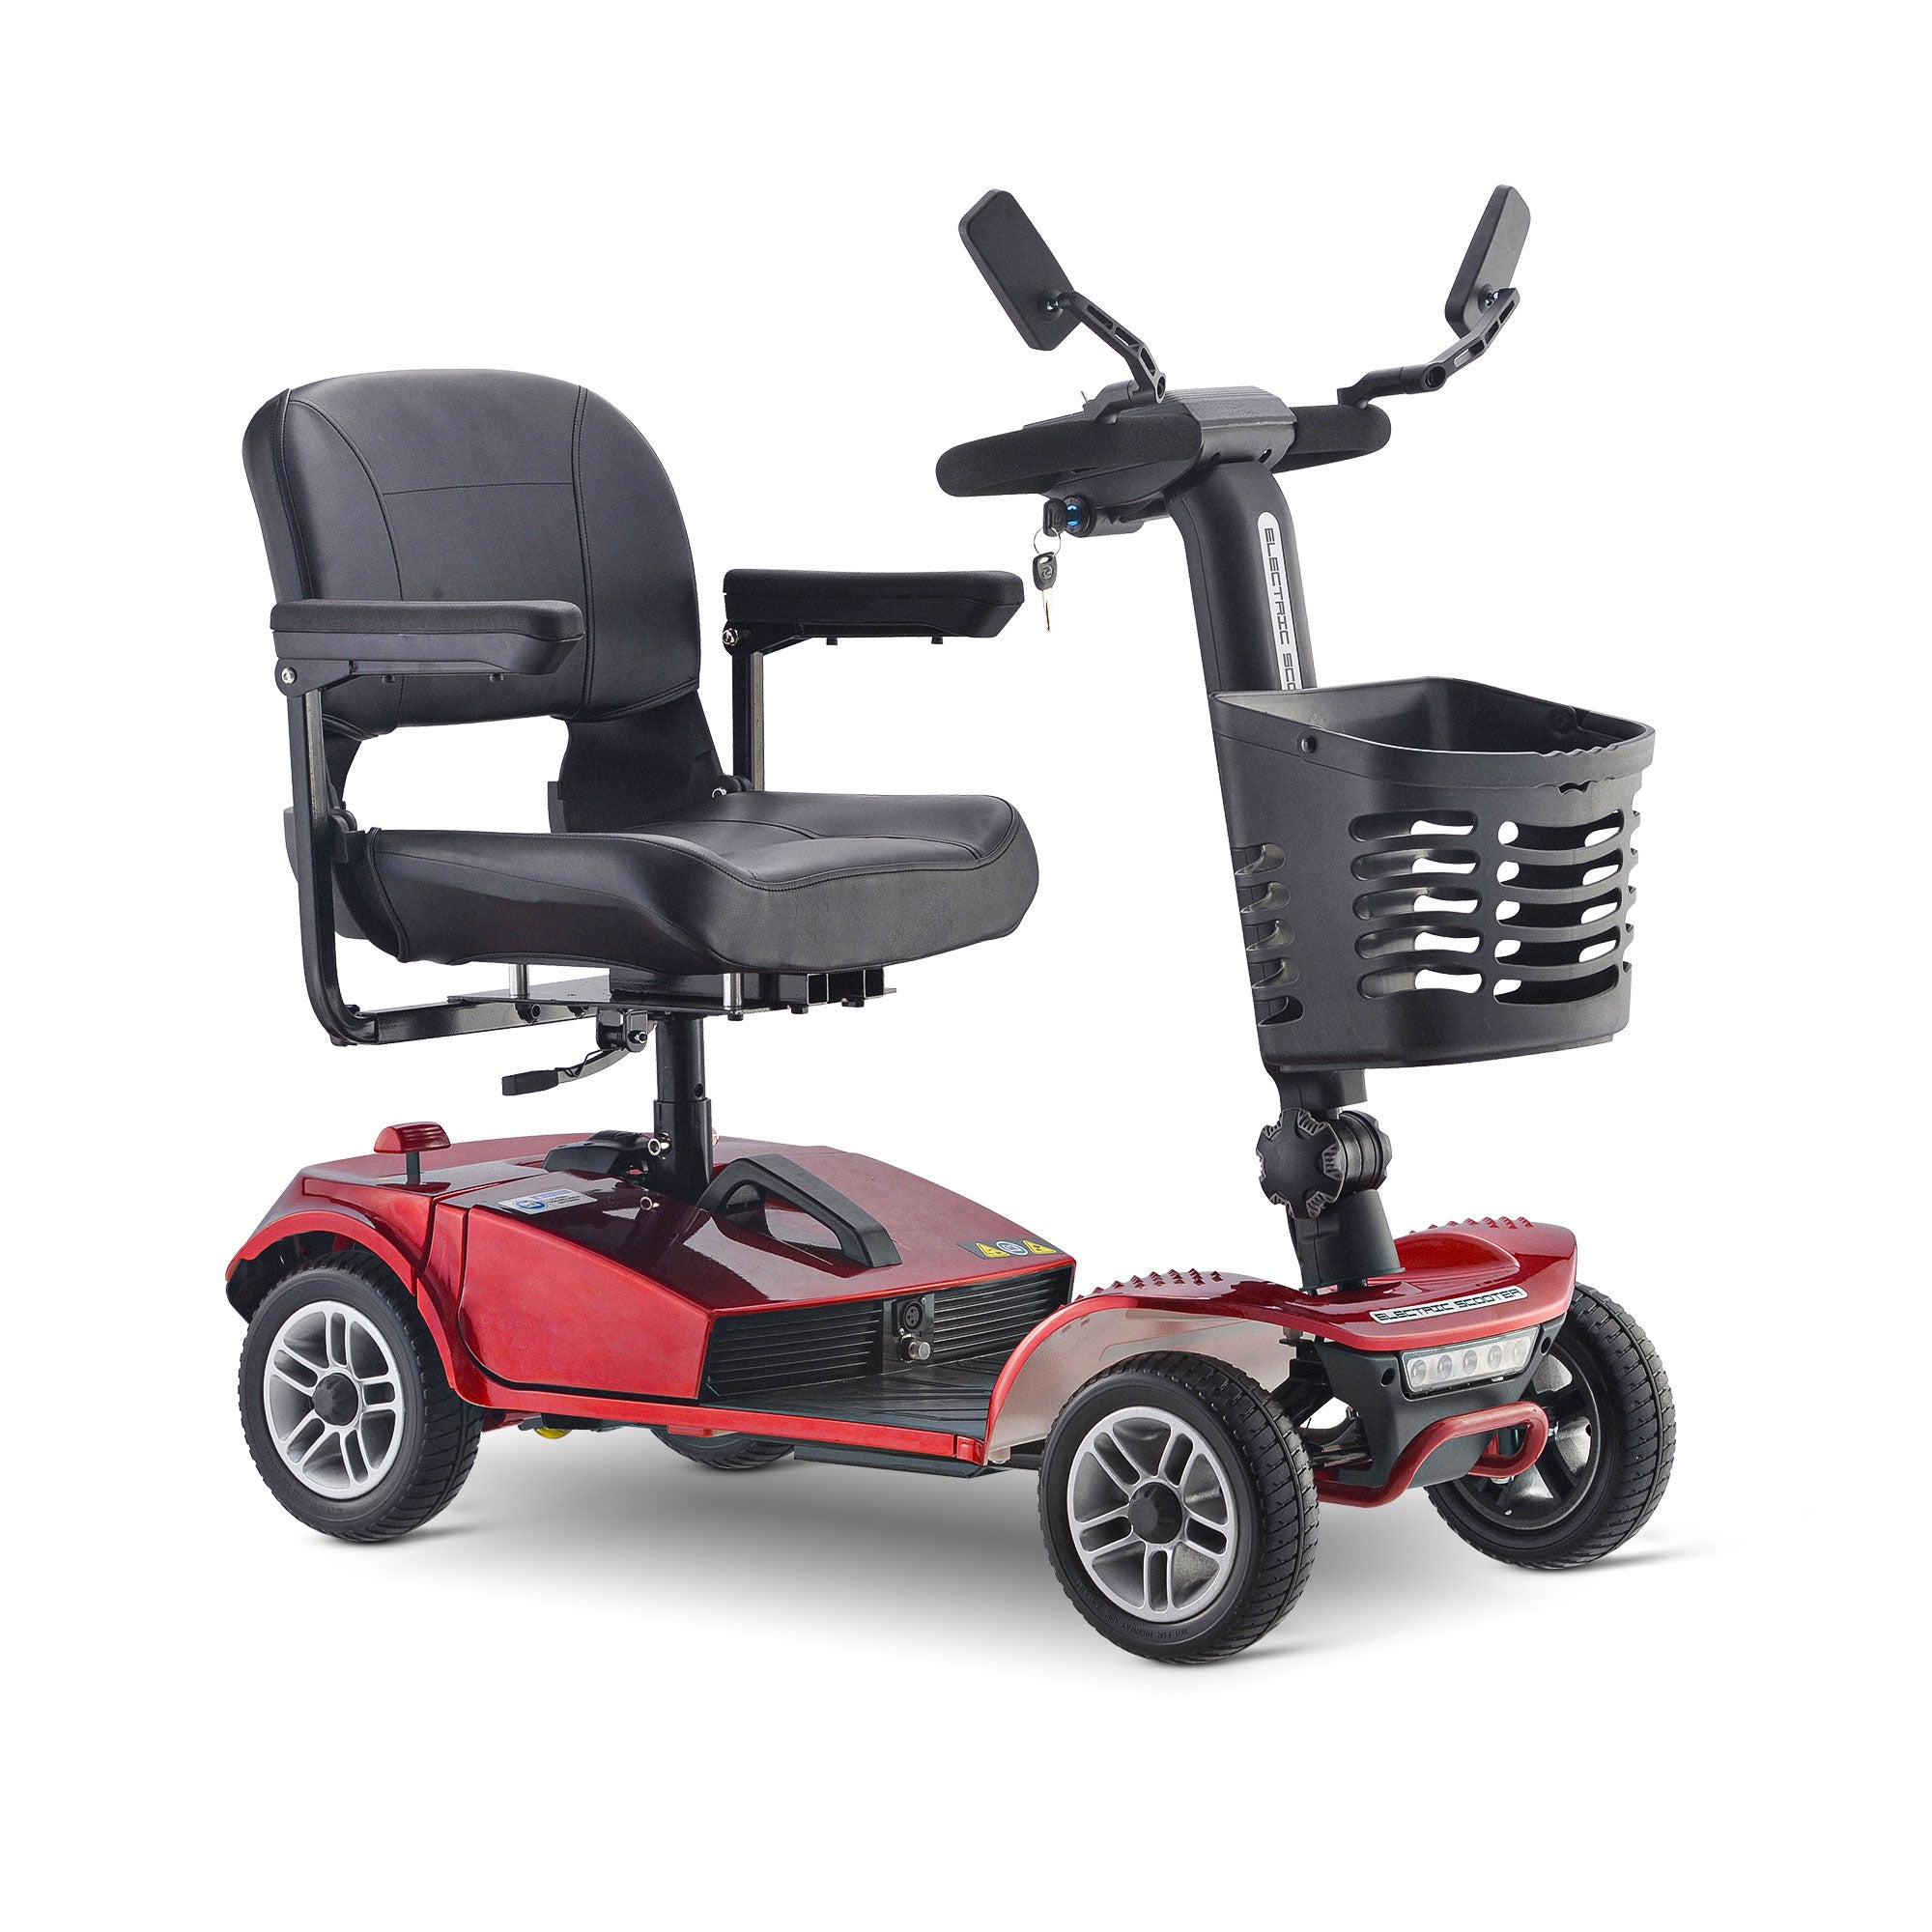 X2 All Terrain Mobility Scooter